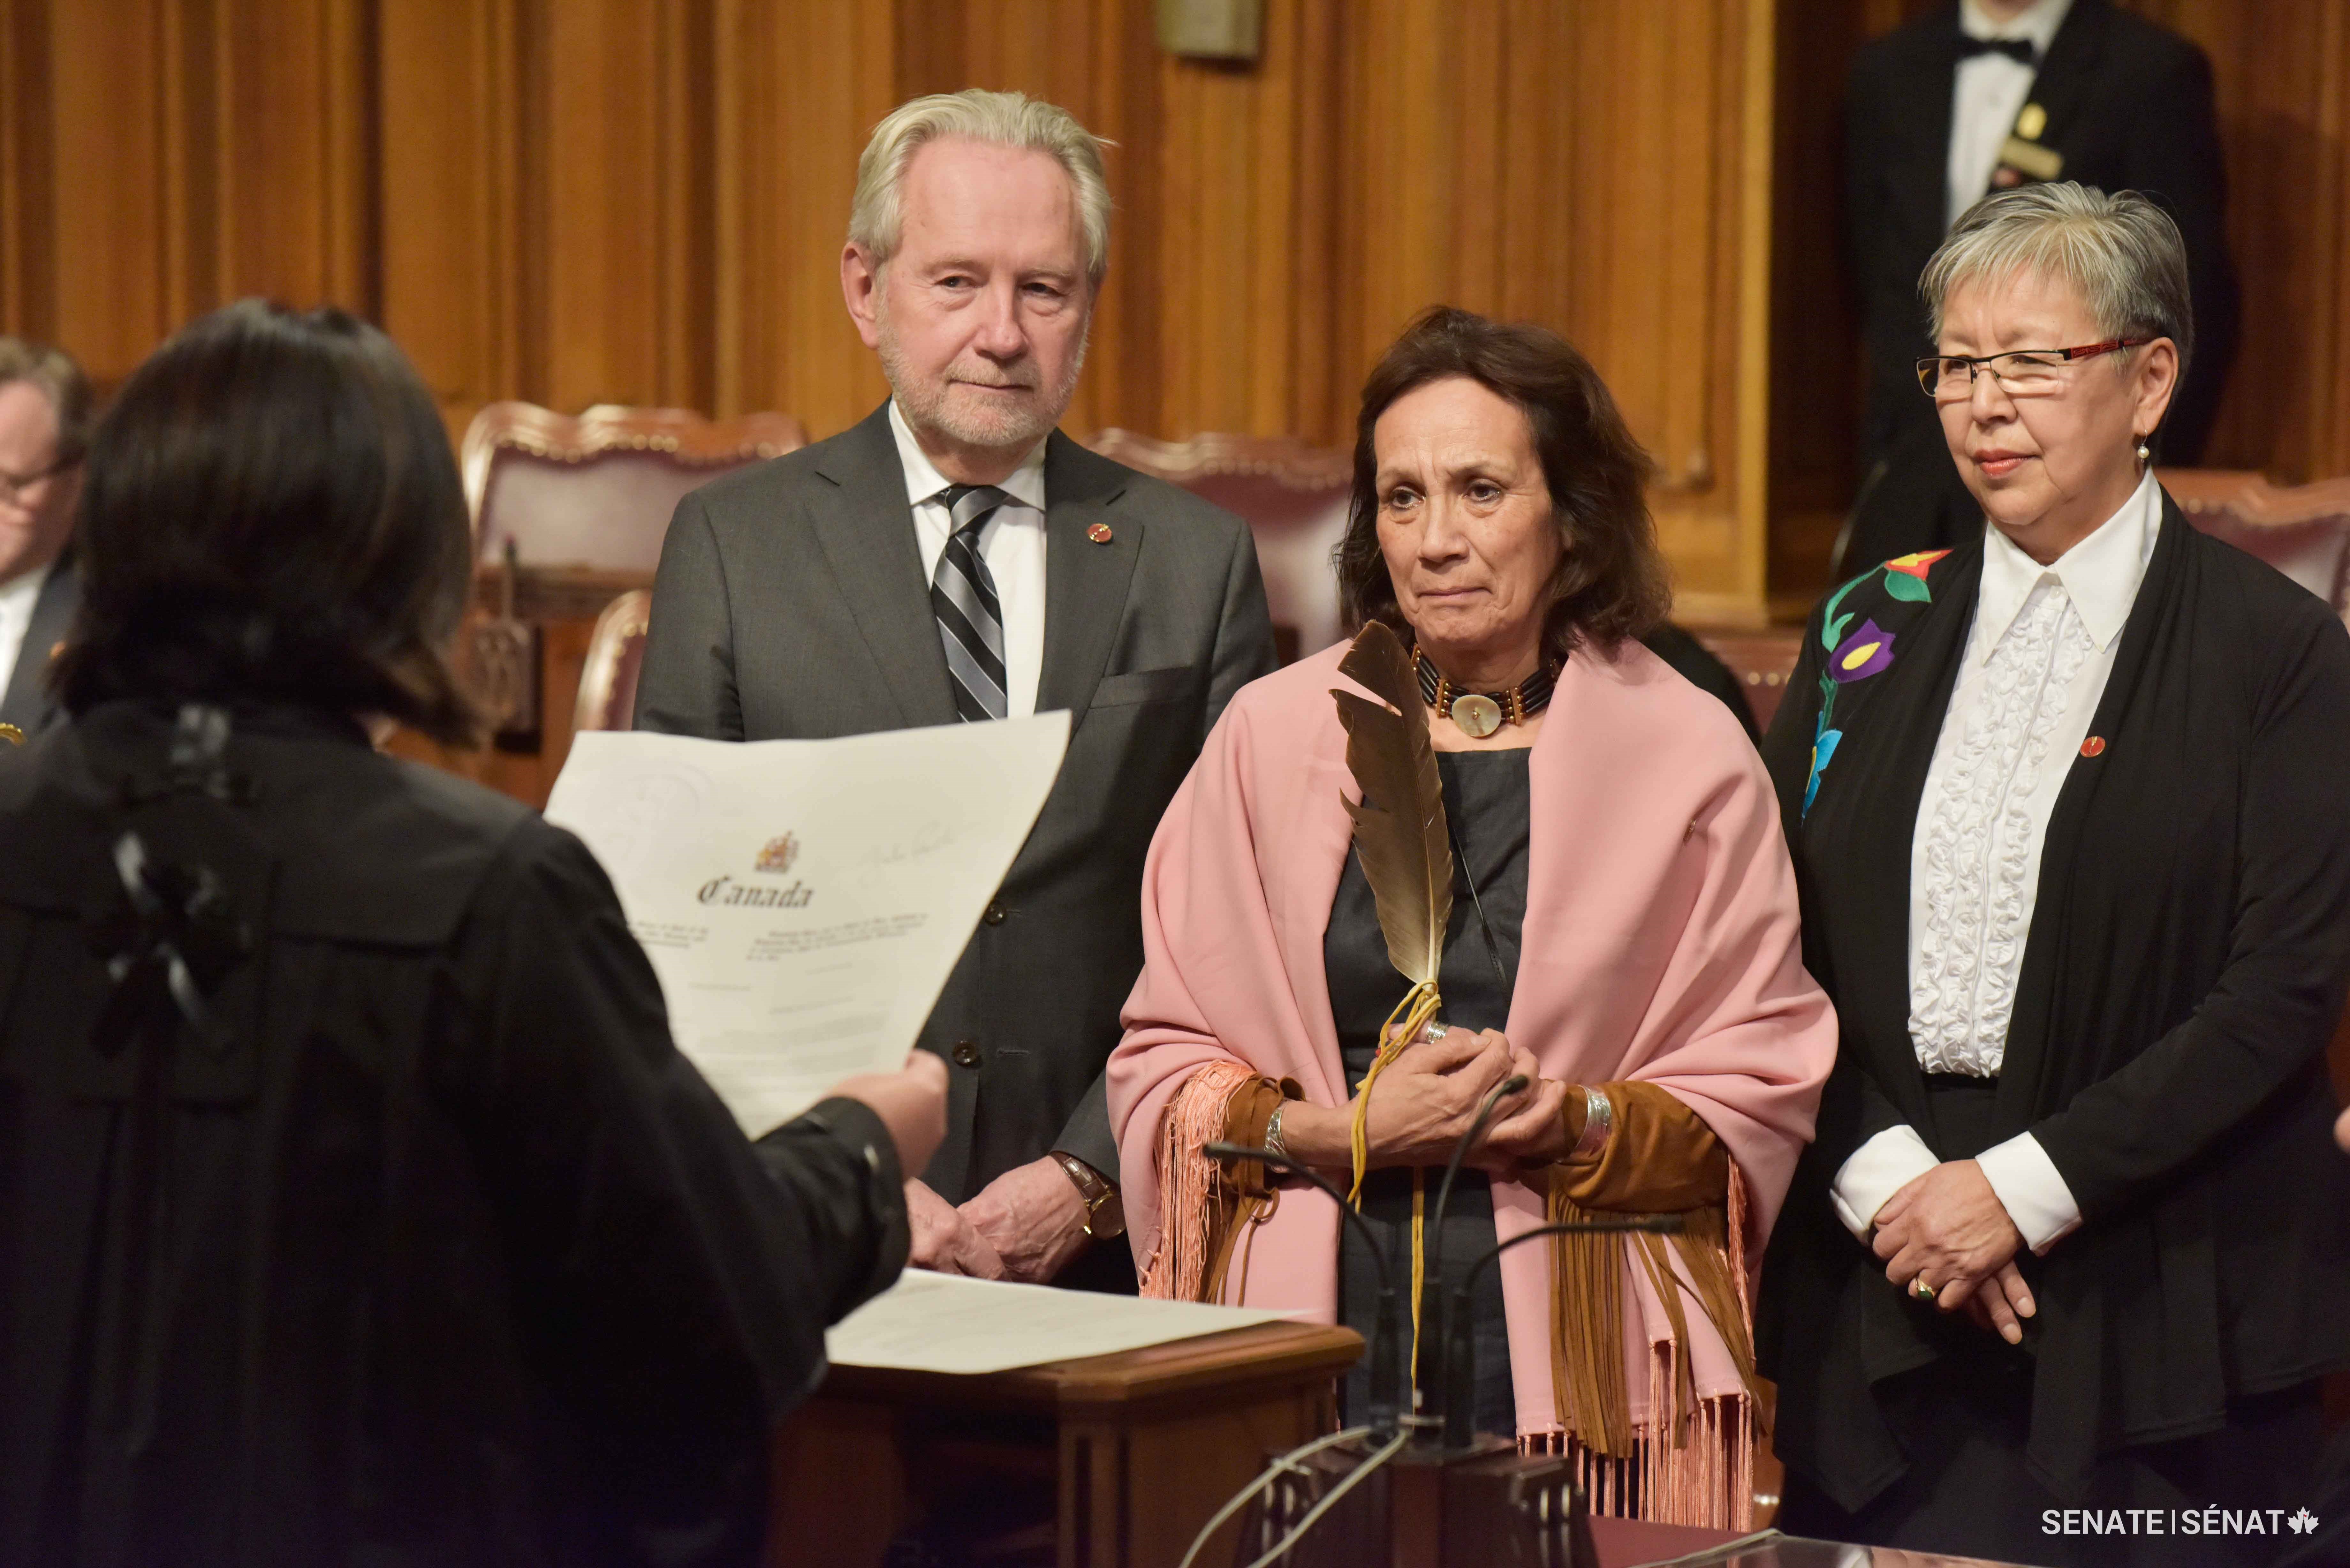 Senator McCallum, centre, holds an eagle feather as she is sworn in to the Senate. Despite everything she has accomplished, she is still scarred from her experiences at the Guy Hill residential school.